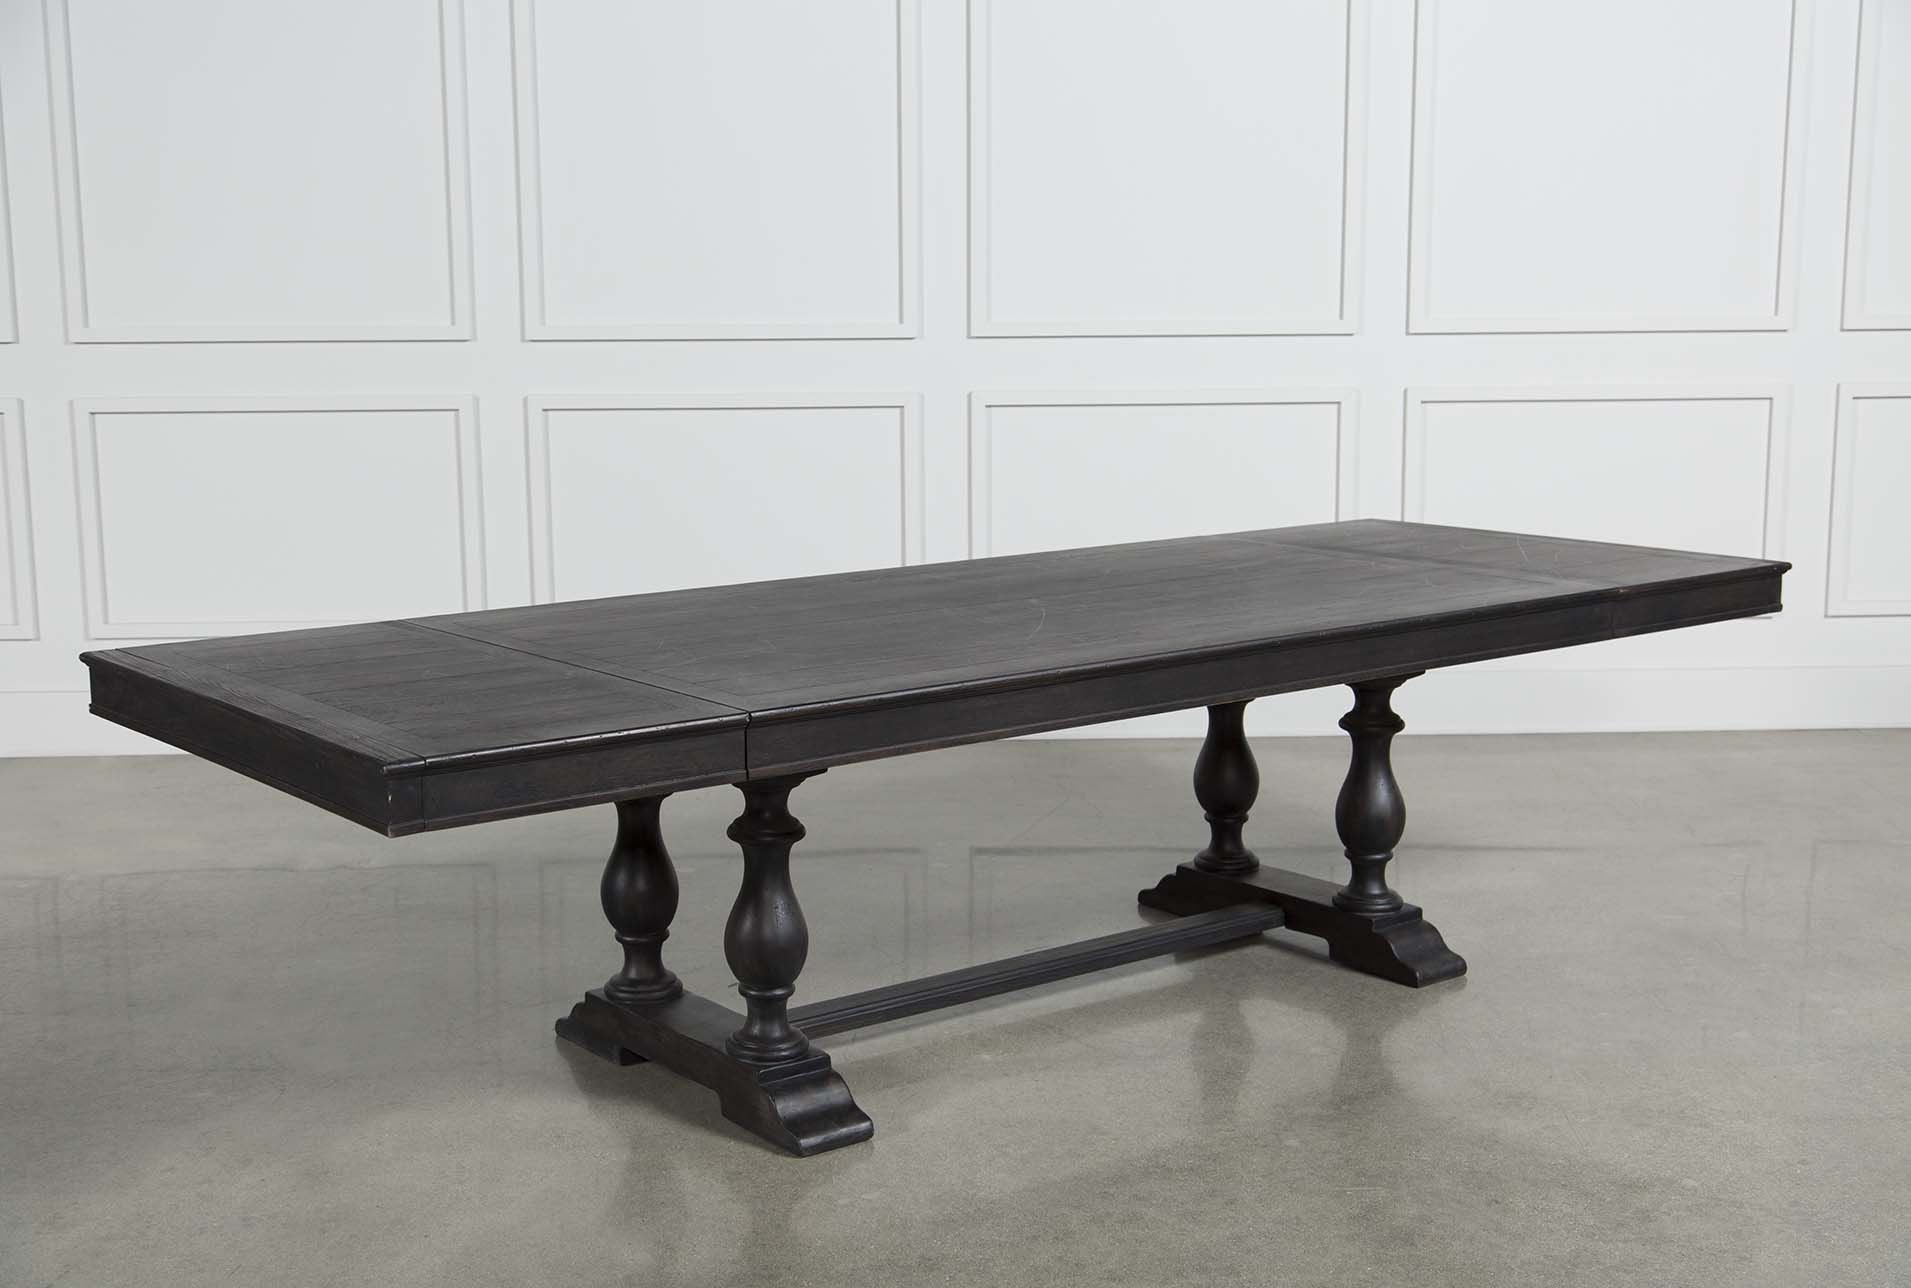 Chapleau Extension Dining Table – Back | Dining Room Ideas With Current Chapleau Ii Extension Dining Tables (View 1 of 20)